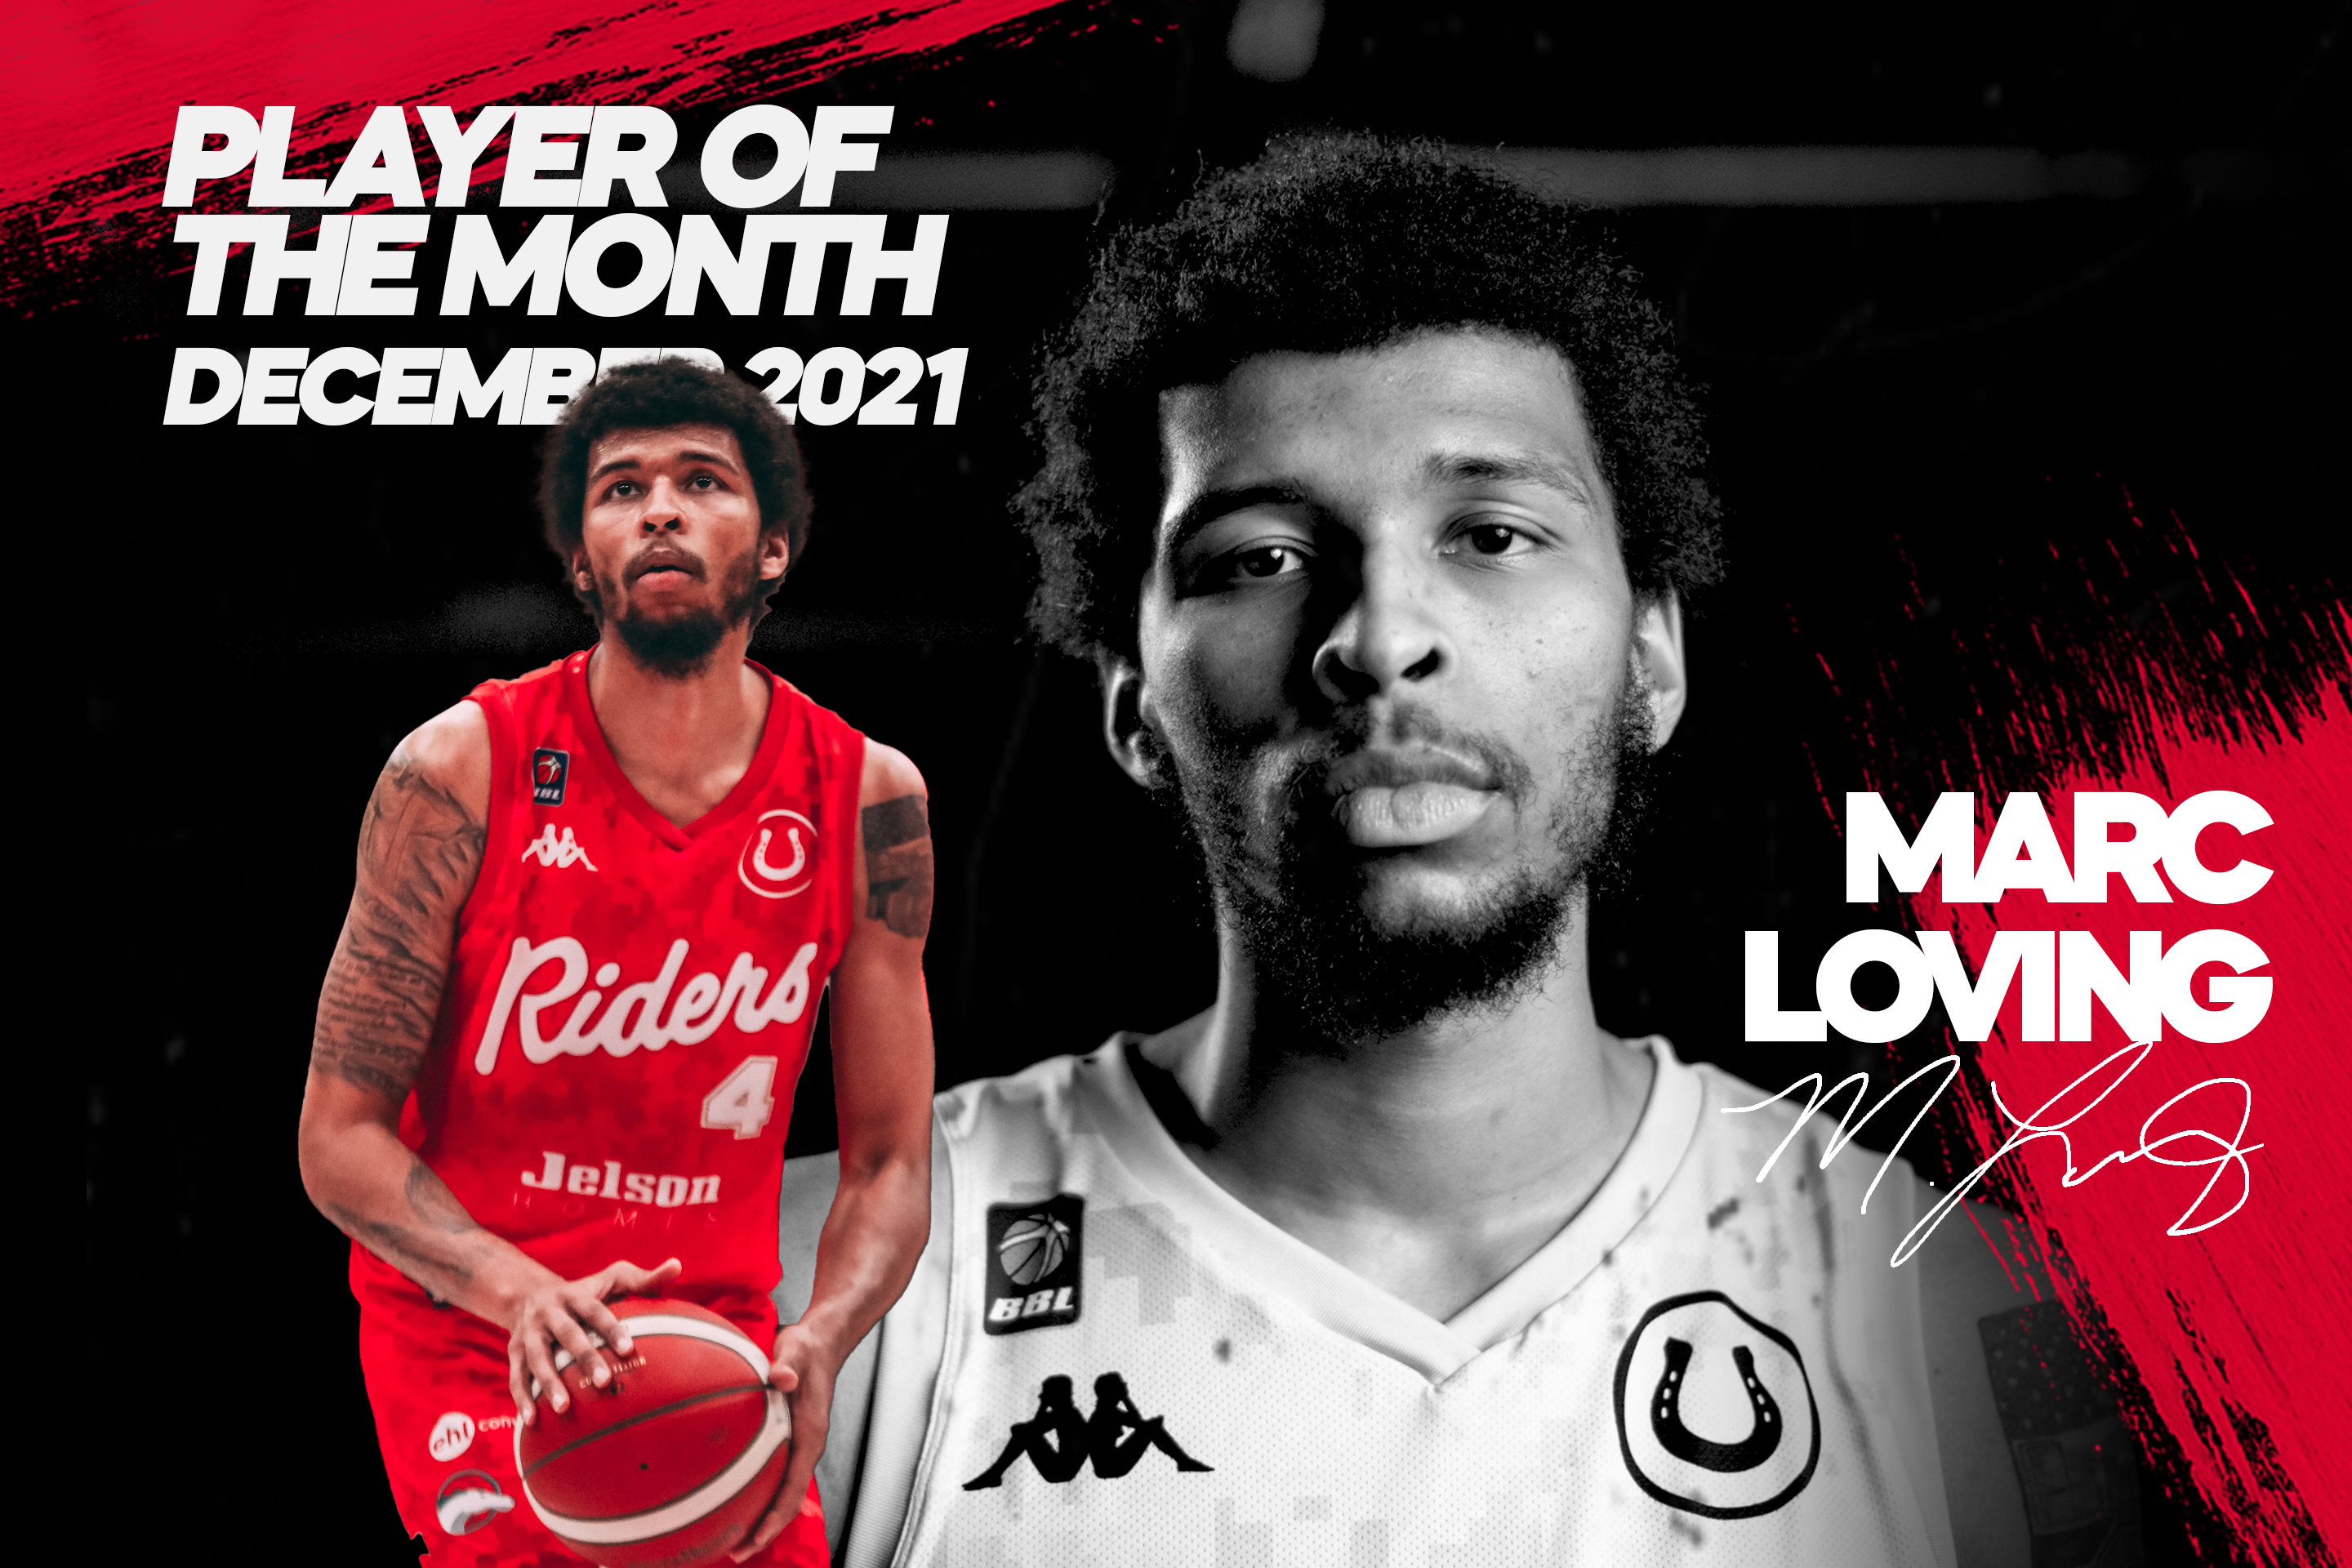 Loving named Player of the Month!